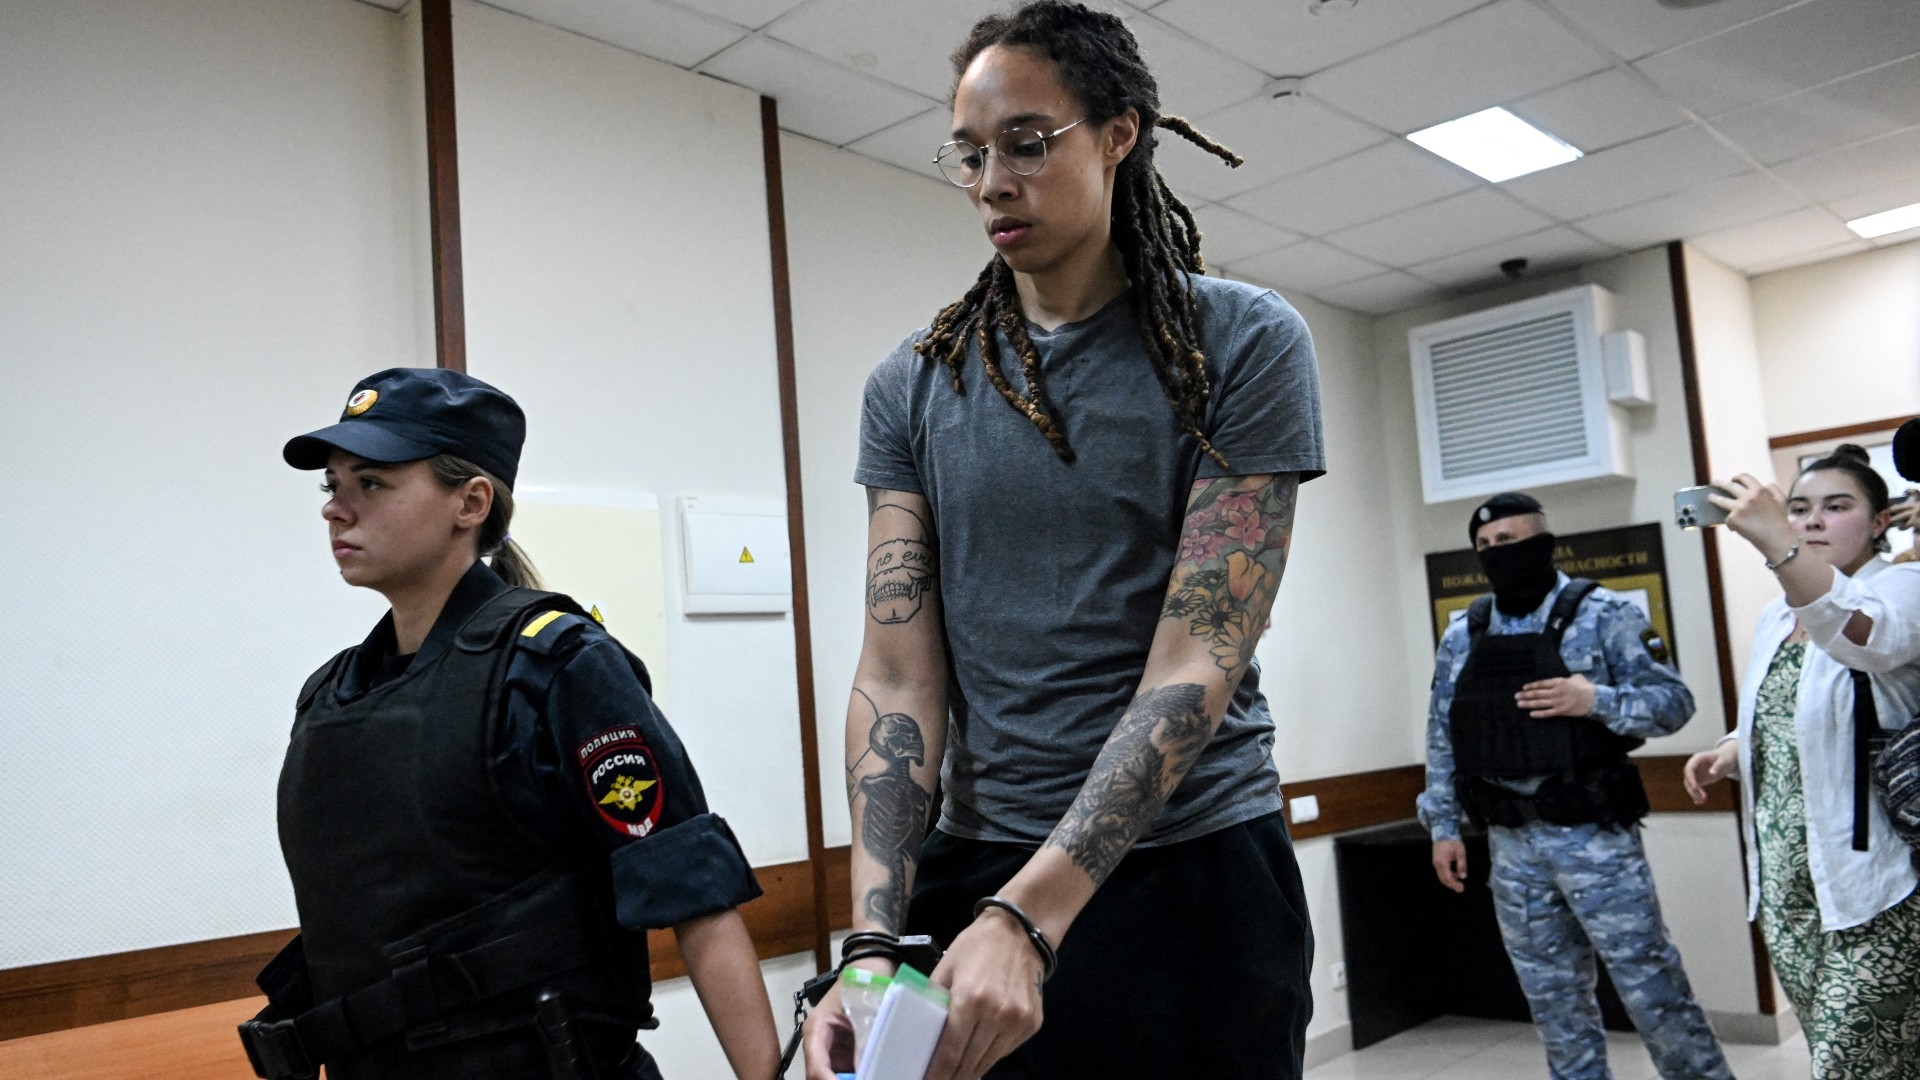 US basketball player Brittney Griner leaves the courtroom before the court's final decision in Khimki outside Moscow on 4 August 2022 (AFP)